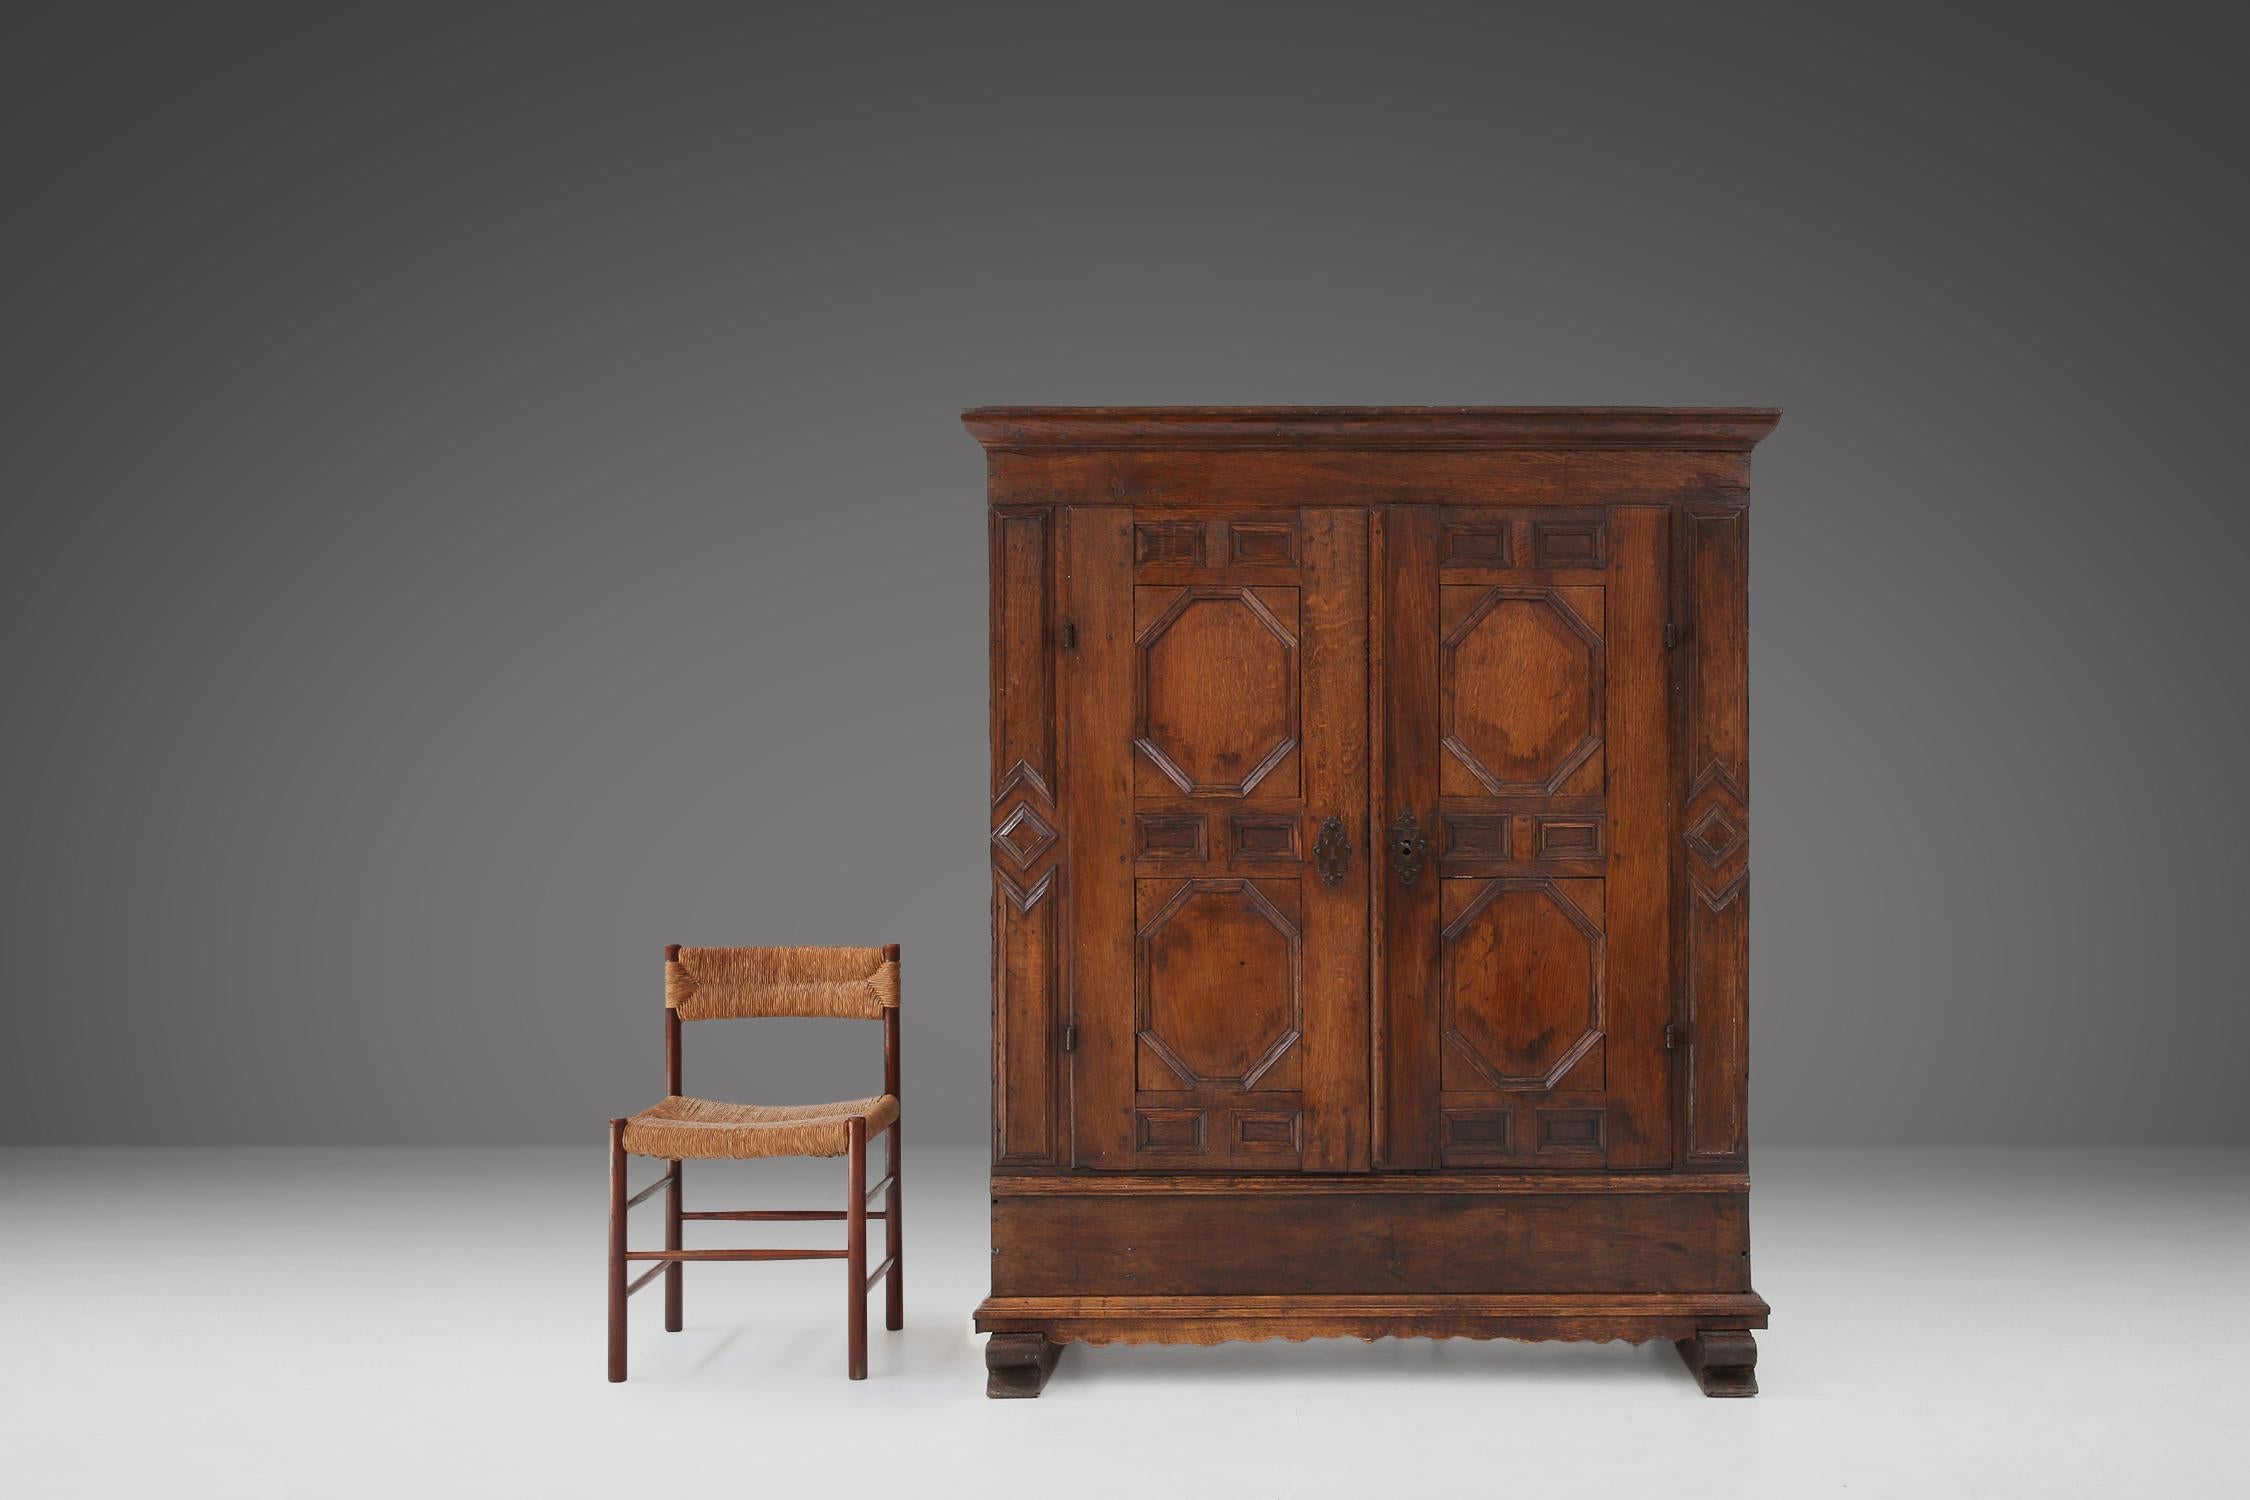 
This Flemish late 18th century cabinet is made of full oak wood, a durable and quality material that has stood the test of time.

The wood has a beautiful patina, a natural sheen created by use and care of the furniture. The cabinet has two doors